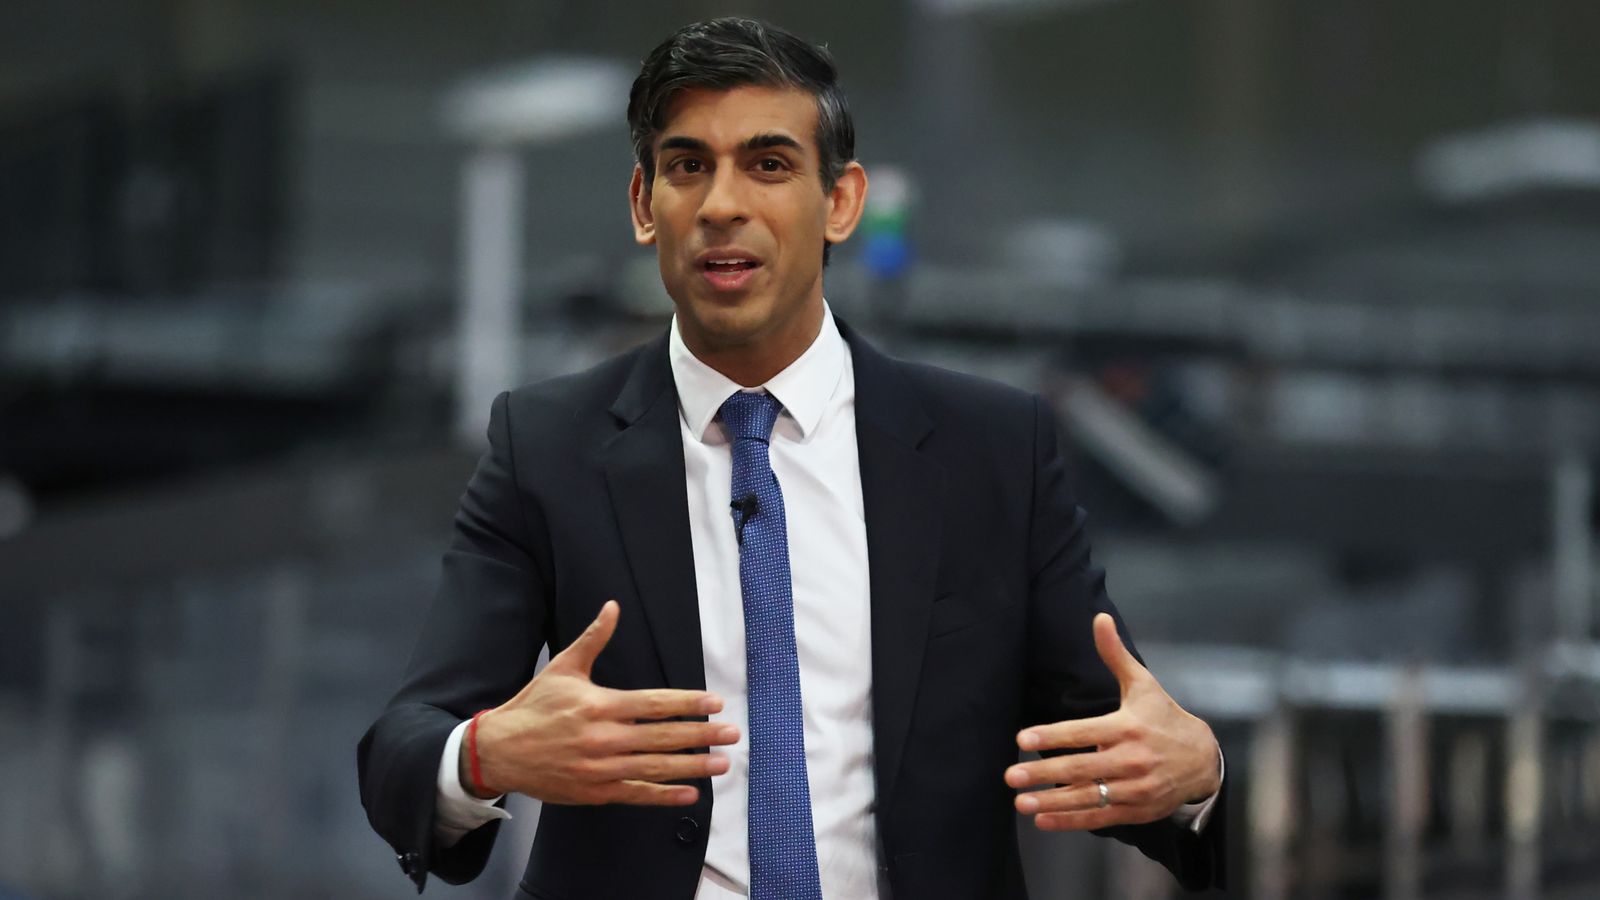 Brexit: Rishi Sunak says Northern Ireland in 'unbelievably special position' because of access to EU single market